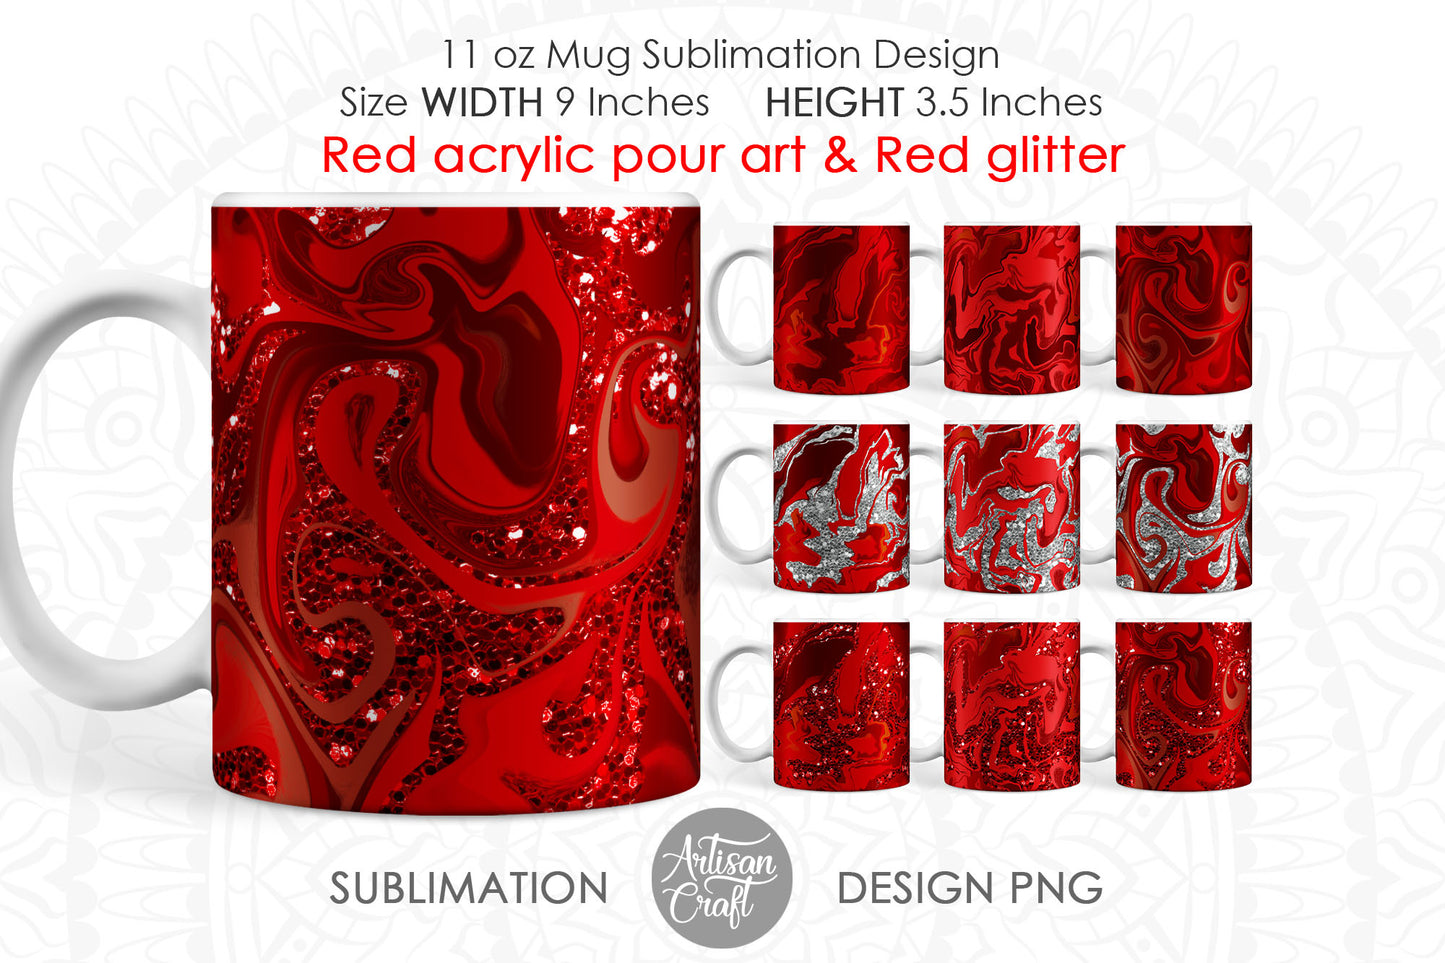 Valentines day mug sublimation with red acrylic pour art and glitter